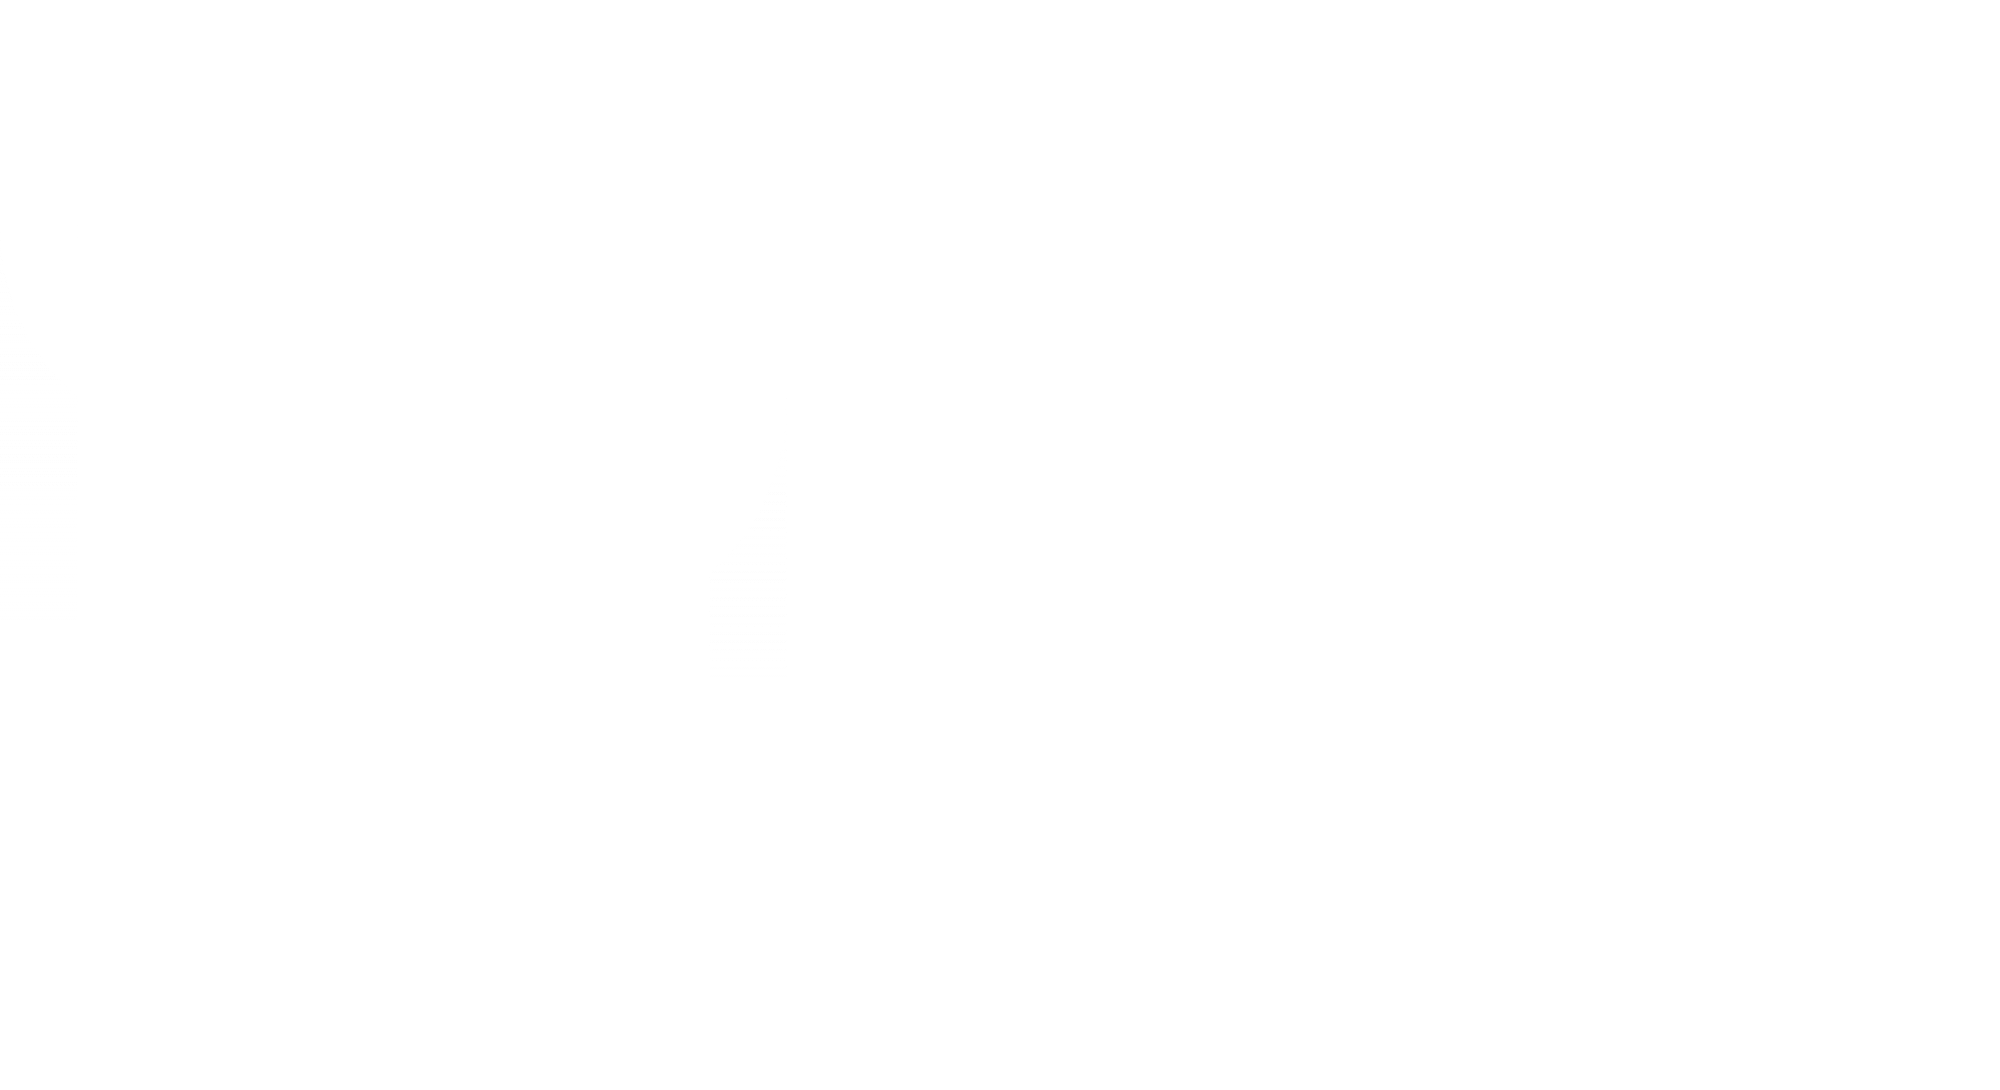 Panasonic Accelerator by Electric Works Company